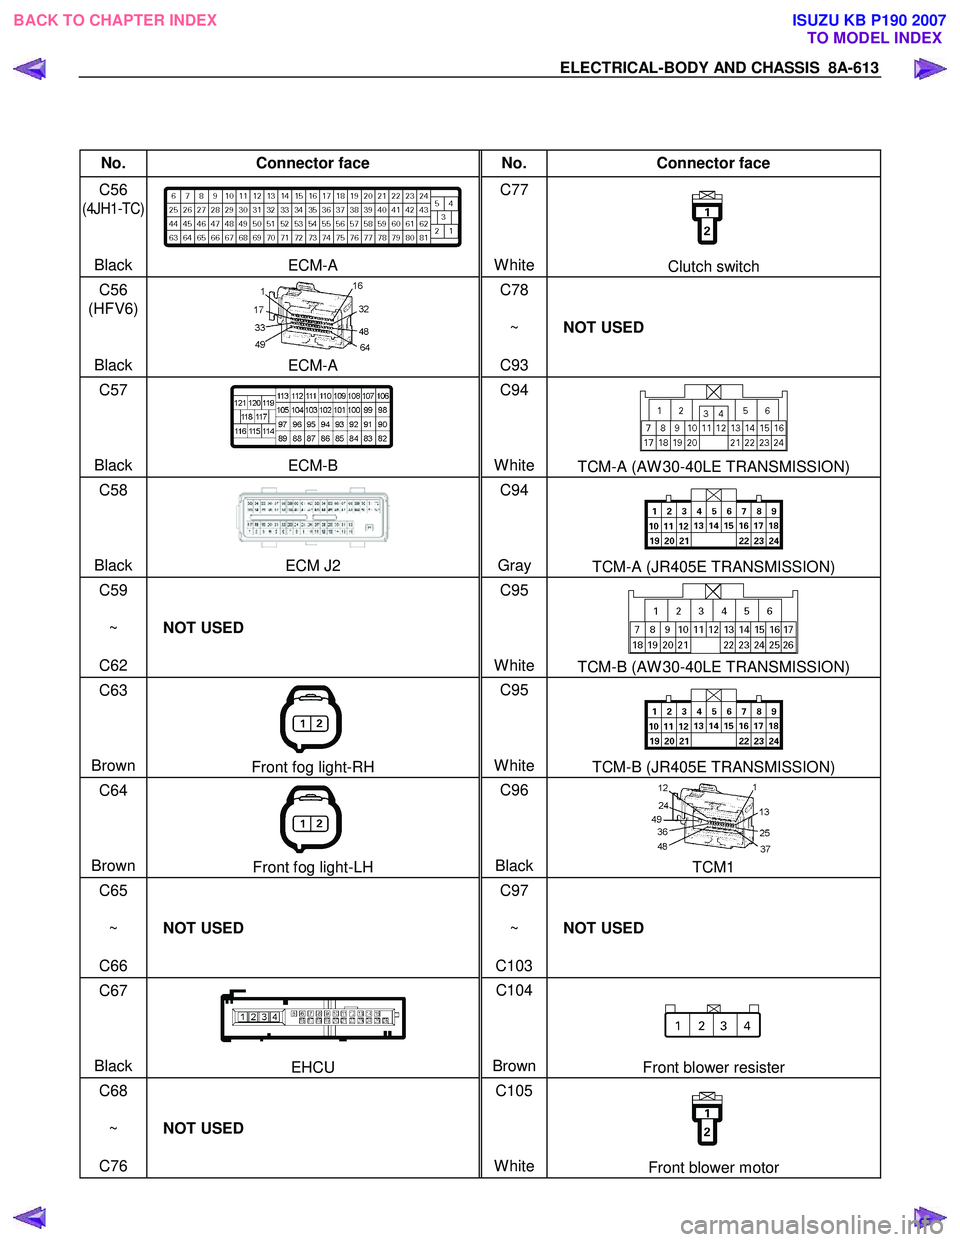 ISUZU KB P190 2007  Workshop Owners Guide ELECTRICAL-BODY AND CHASSIS  8A-613 
 
 
No. Connector face  No. Connector face 
C56 
(4JH1-TC) 
  
 
Black 
ECM-A  C77 
 
 
 
WhiteClutch switch 
C56 
(HFV6)   
 
Black 
ECM-A  C78 
 
~   
C93  NOT U